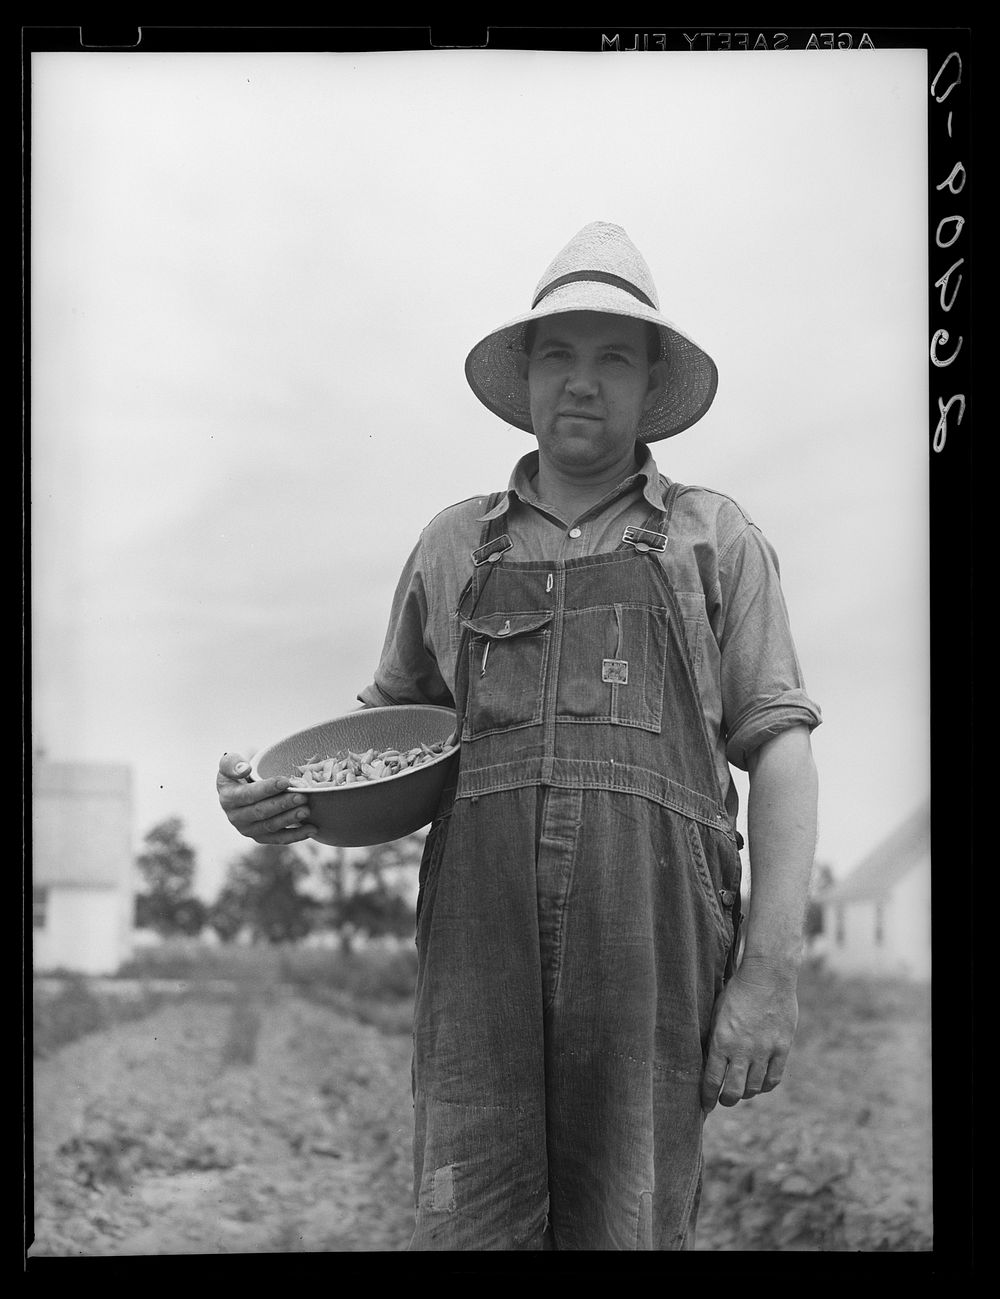 Resettled farmer at Wabash Farms, Indiana. Sourced from the Library of Congress.